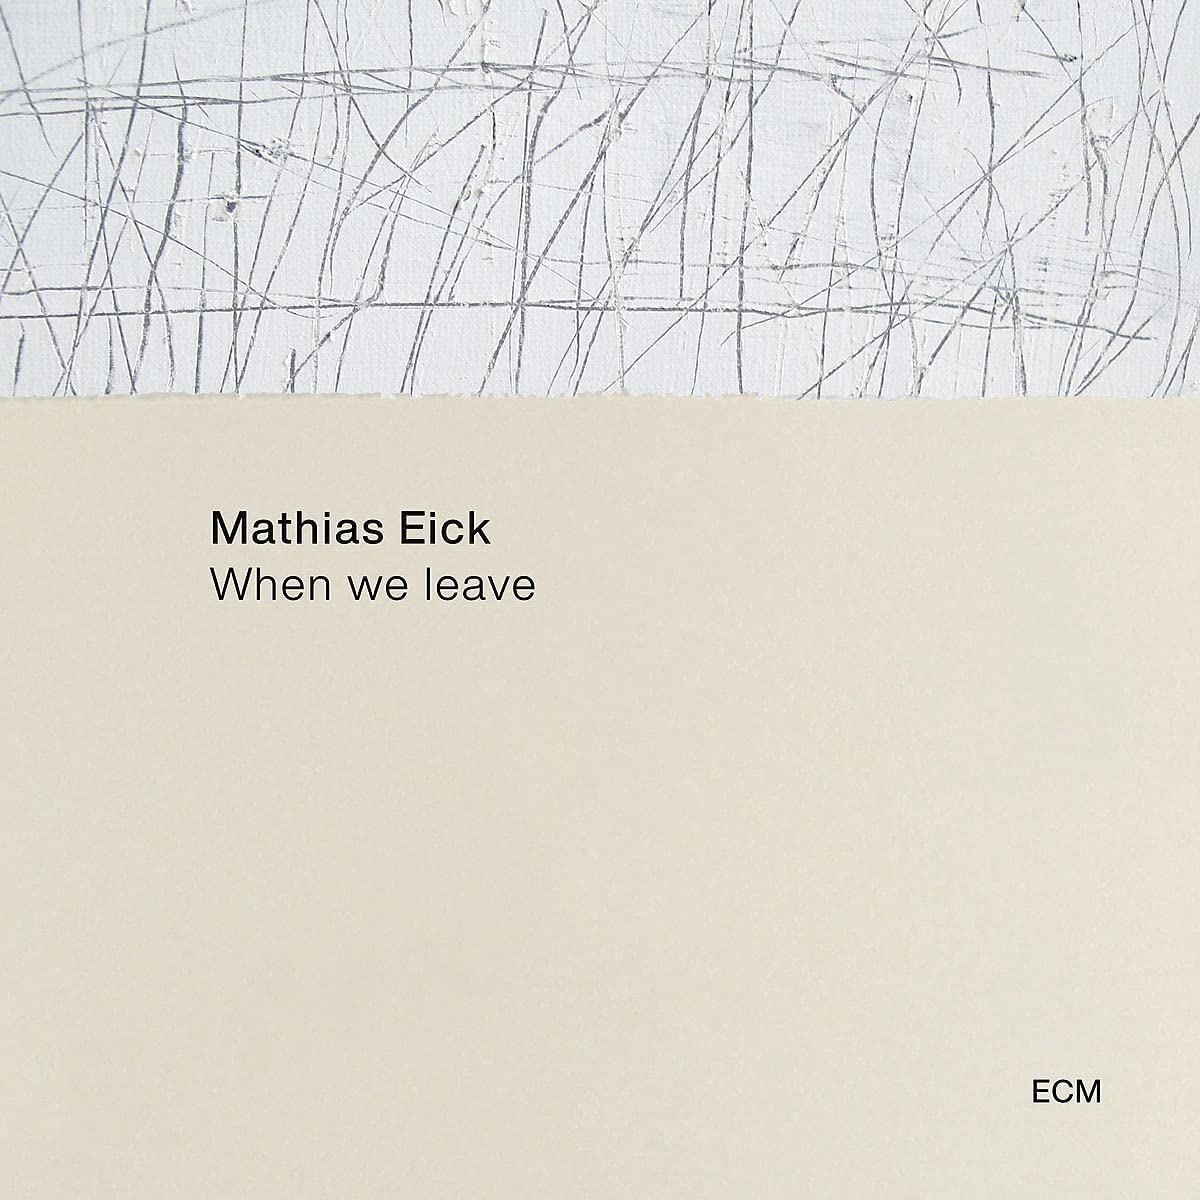 WHEN WE LEAVE